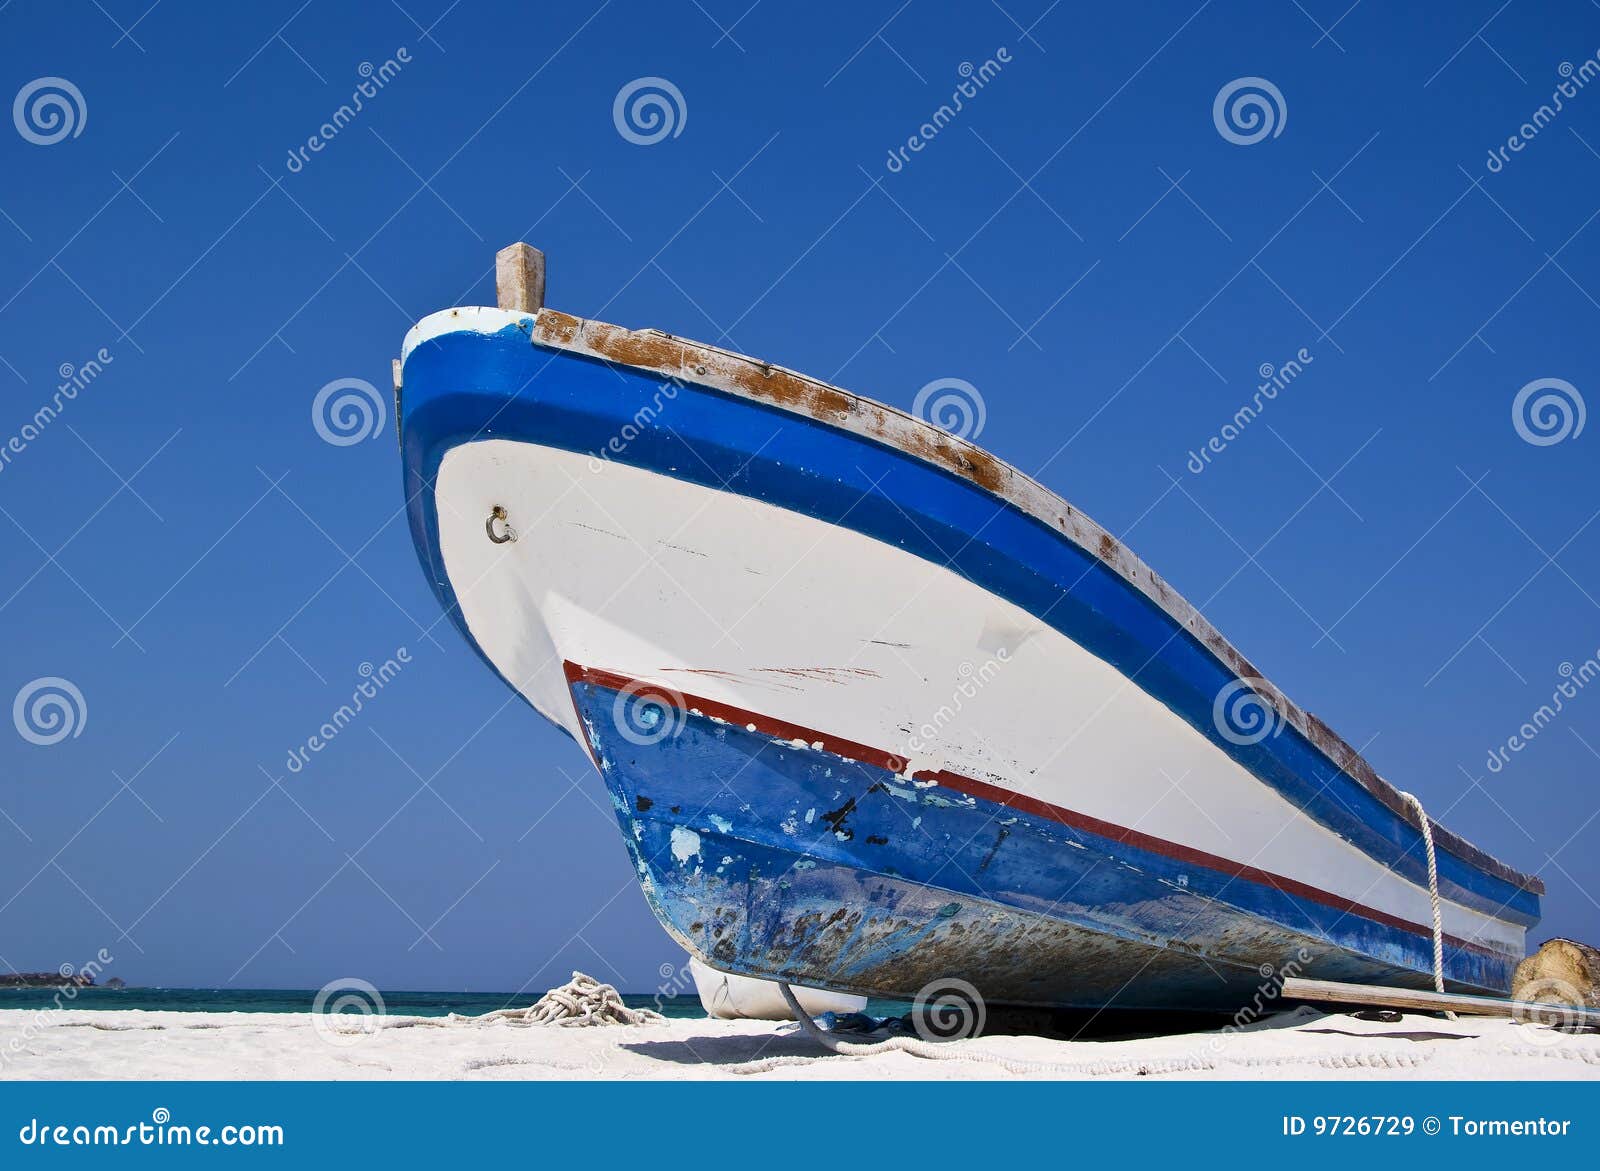 Old Fishing Boat On A Caribbean Beach. Stock Image - Image 